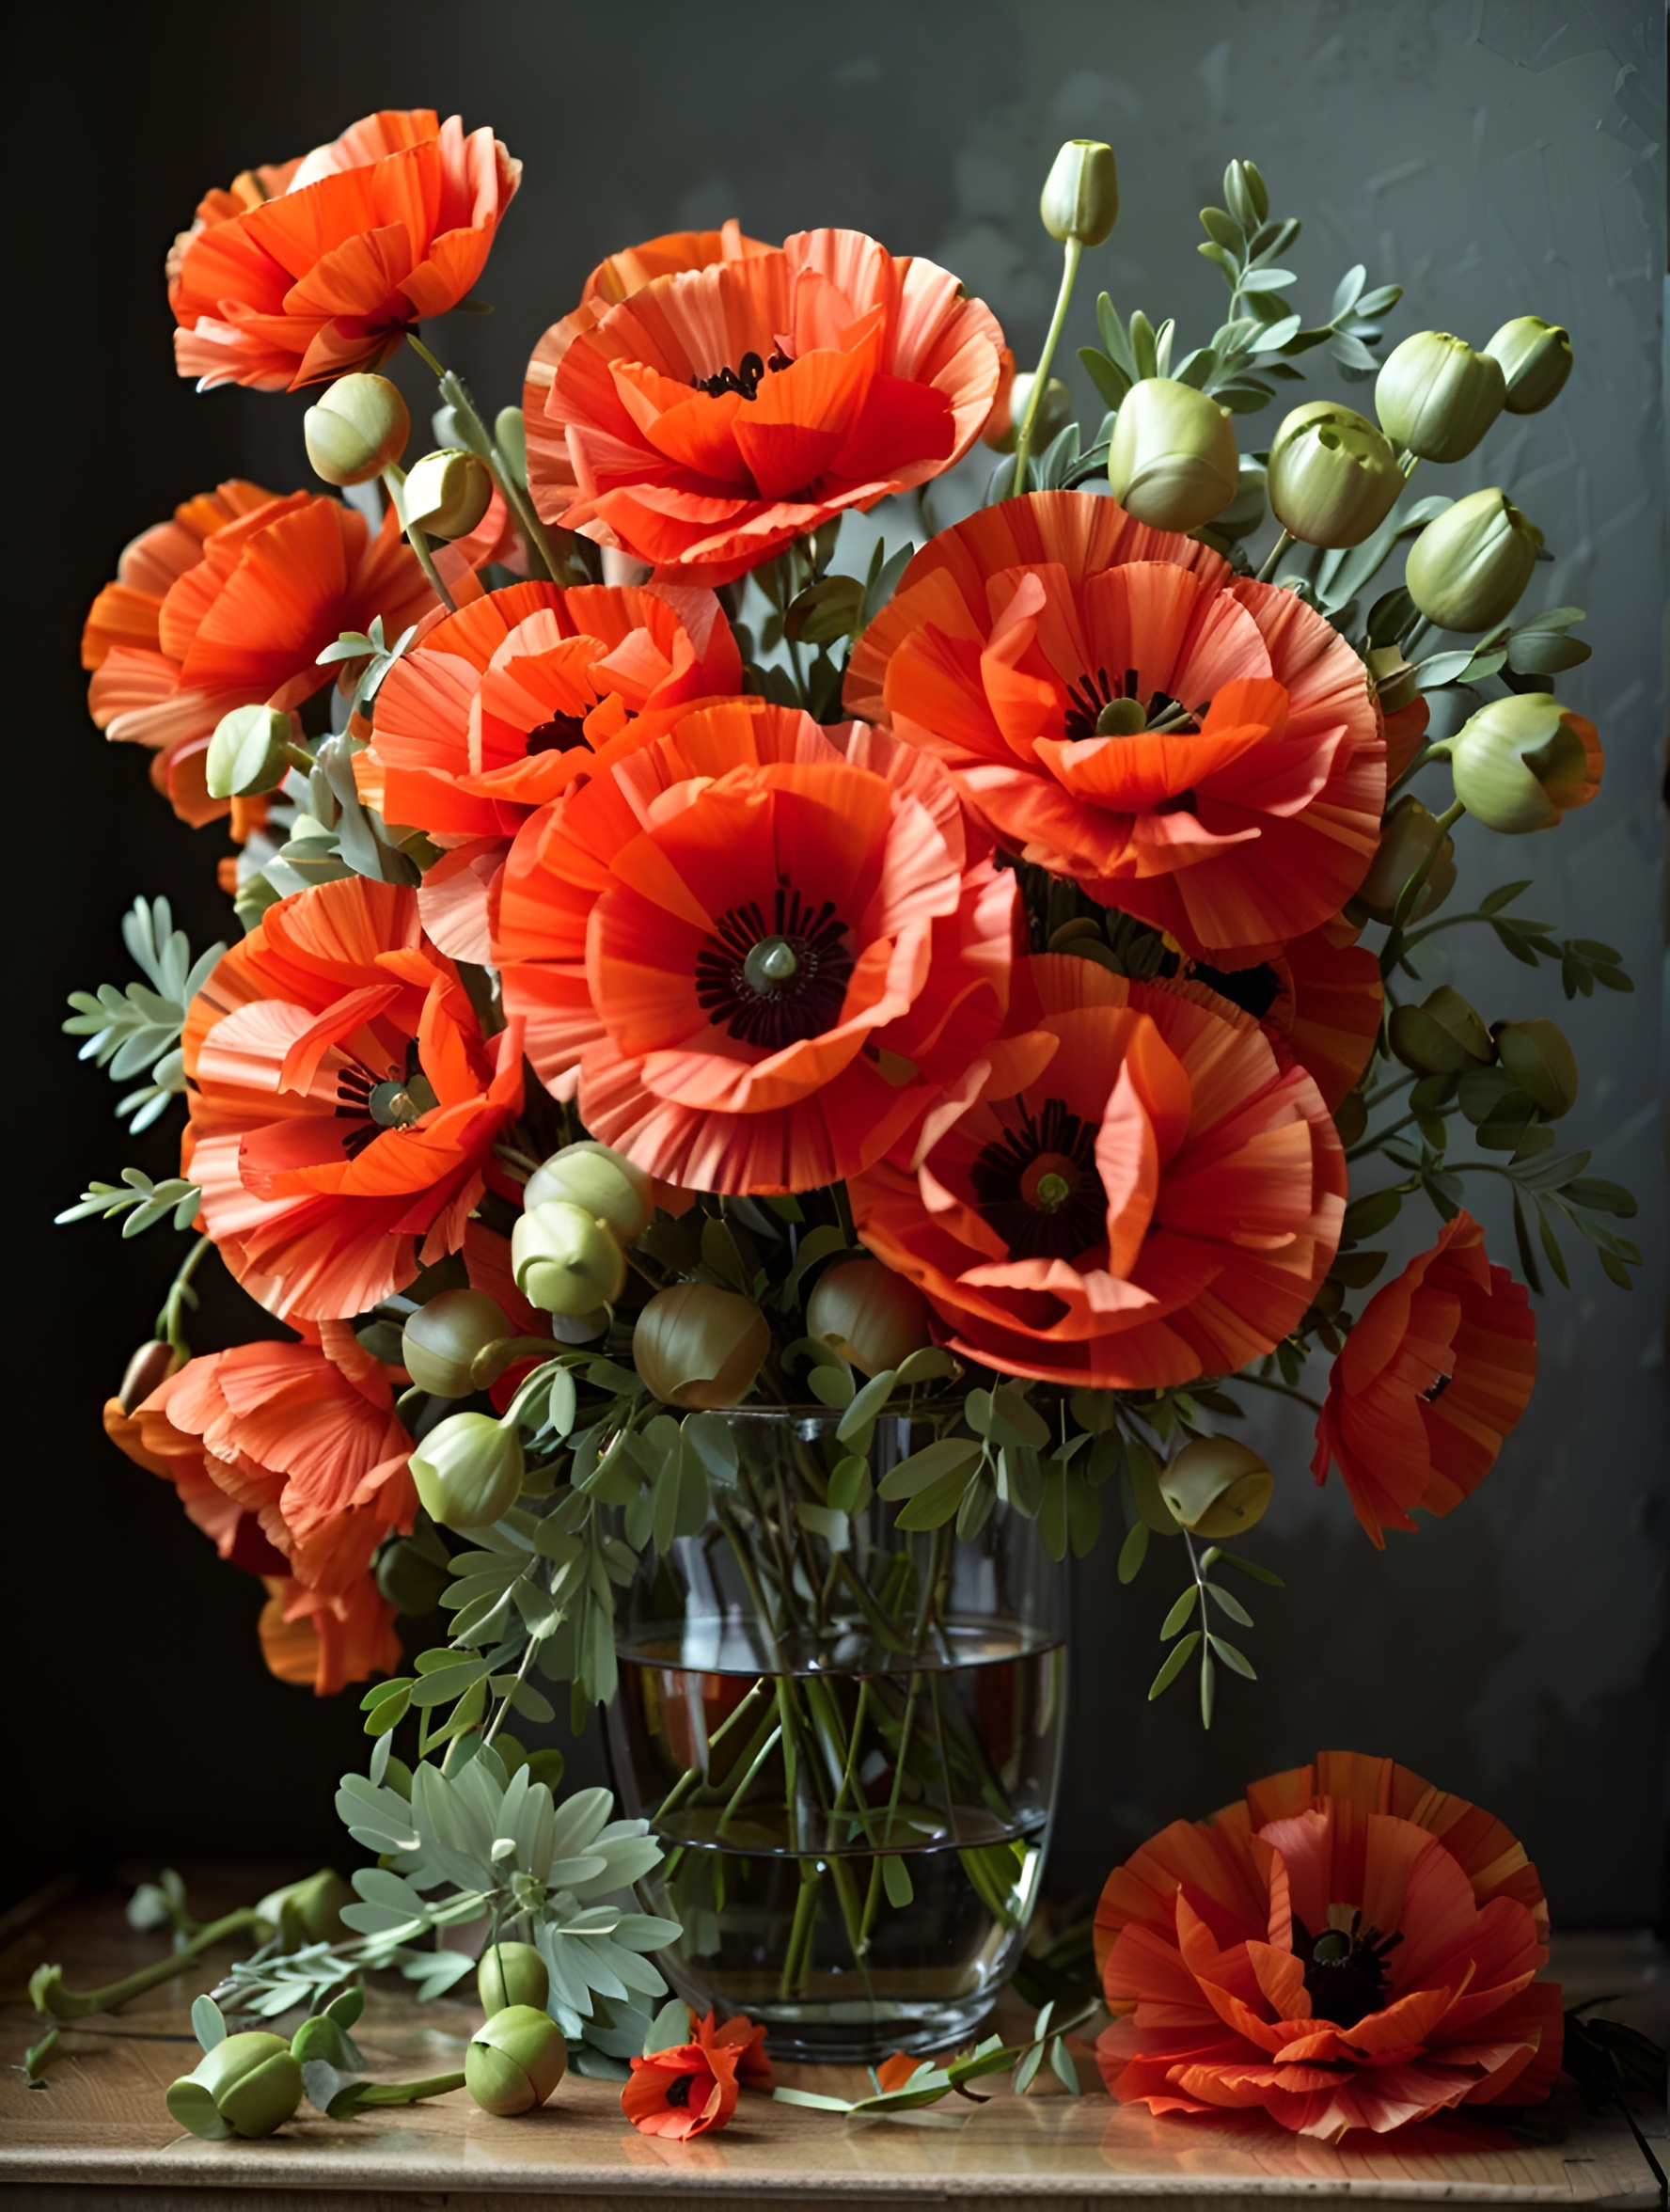 Default bouquet of poppies flowers 3 ae2aa9b8 9843 4af1 ad5e 7d9362a4dbc7 0